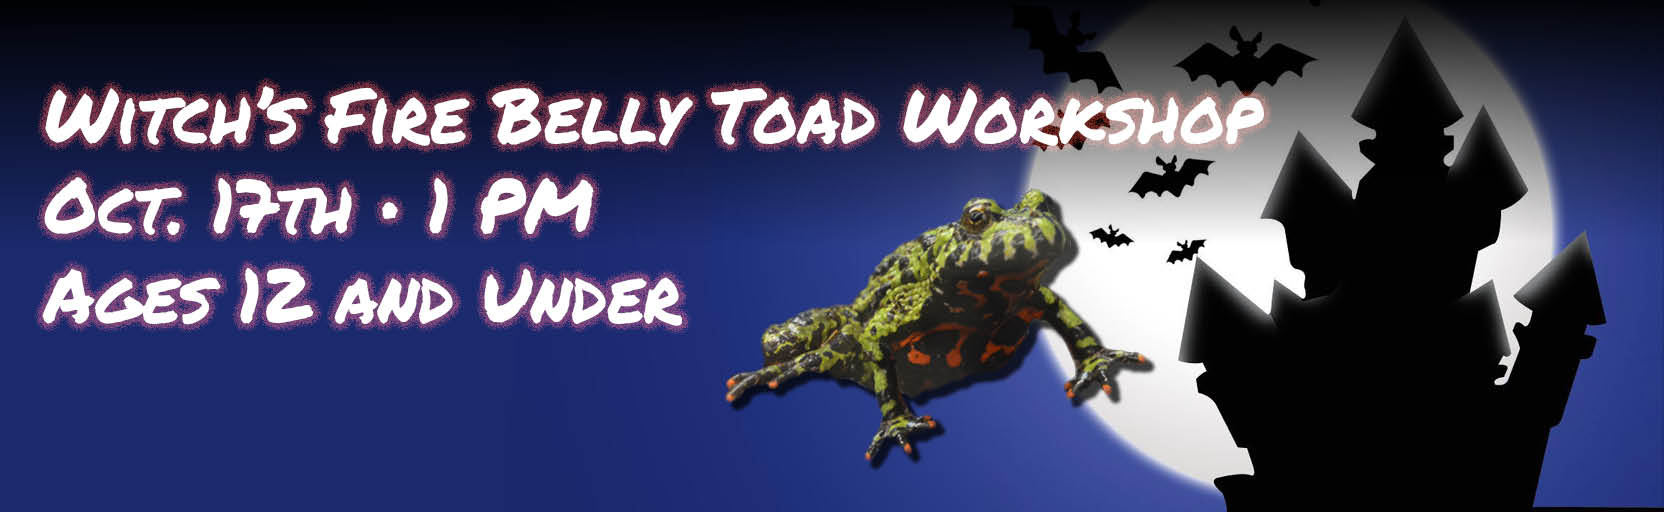 Firebelly Toad Workshop at Alsip Nursery